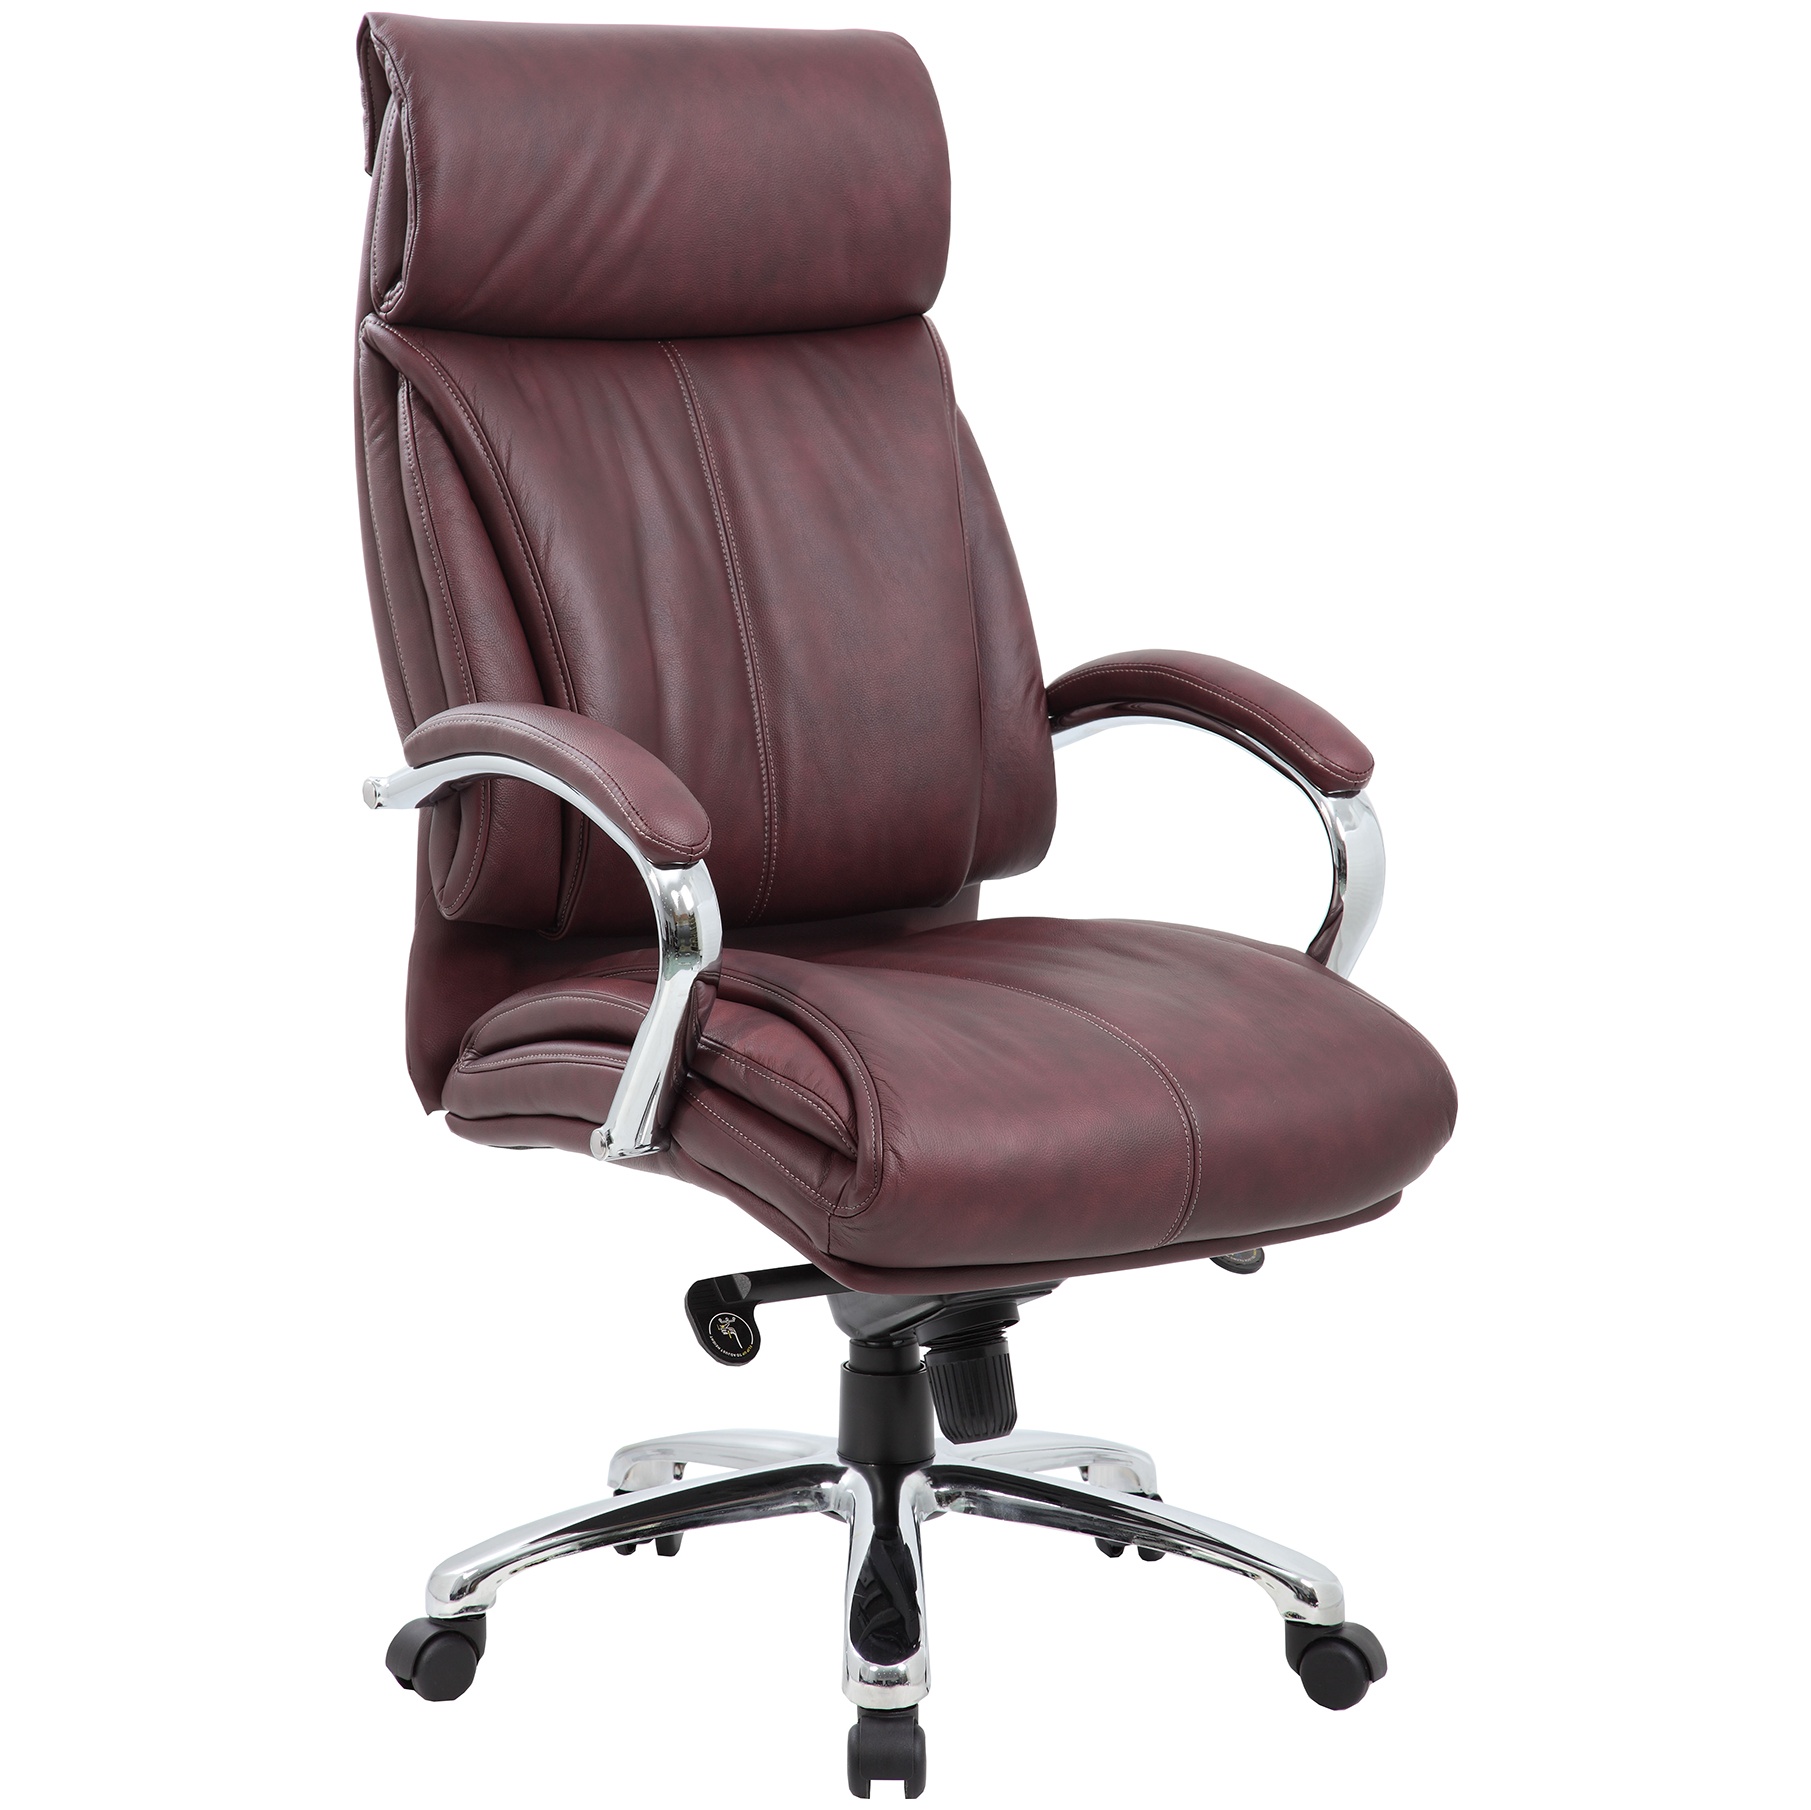 Savona Top Leather Executive Office Chair Brown | Executive Office Chairs